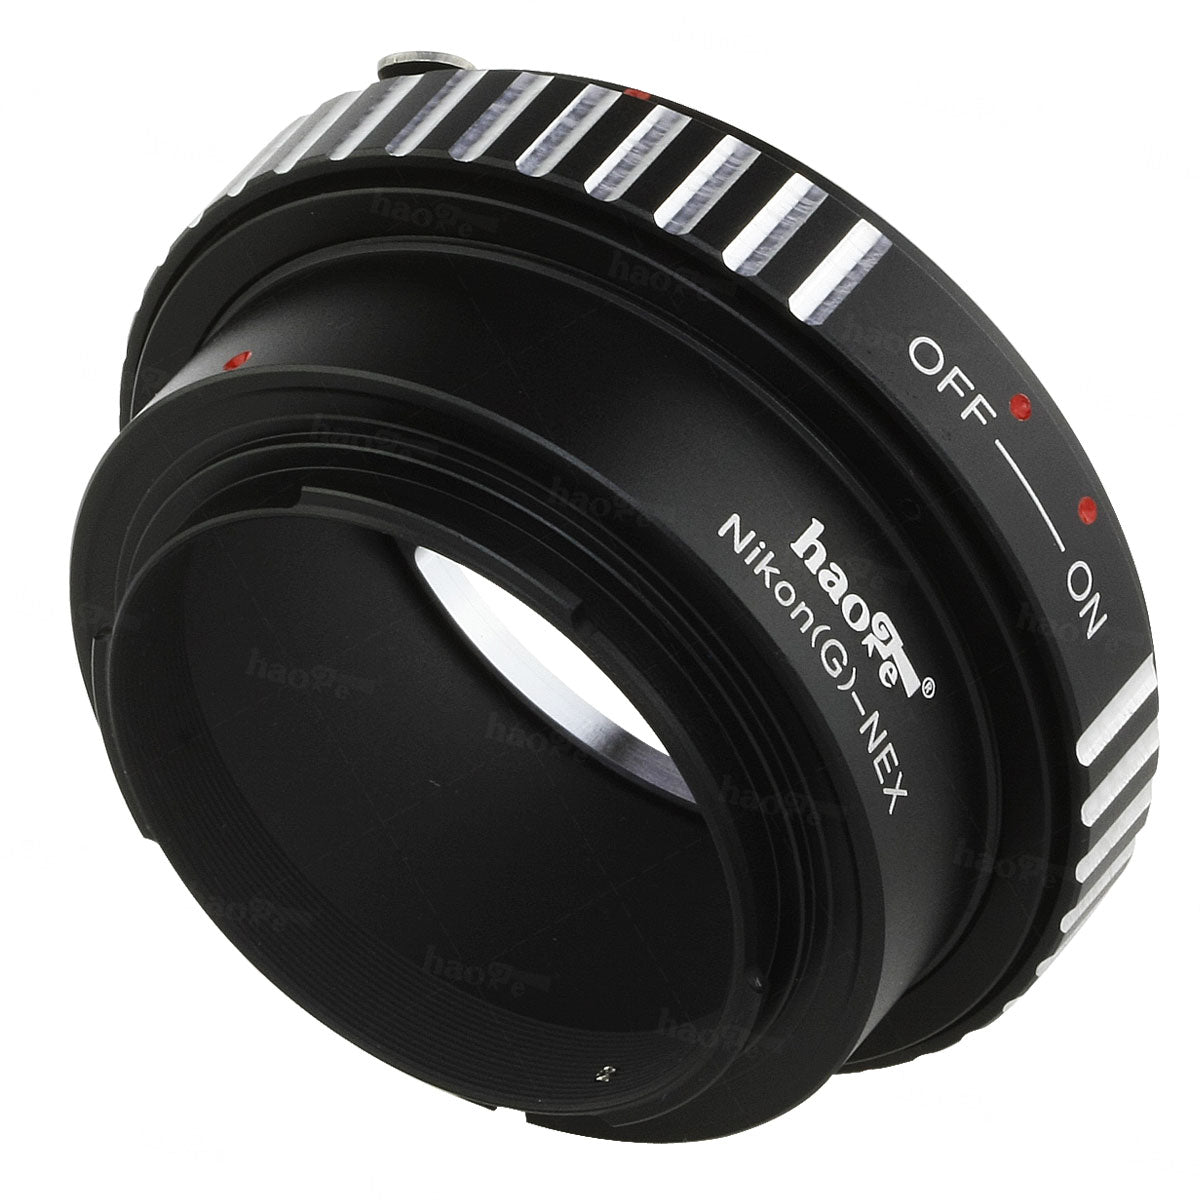 Haoge Lens Mount Adapter for Nikon G/F/AI/AIS/D Mount Lens to Sony E-mount NEX Camera such as NEX-3, NEX-5, NEX-5N, NEX-7, NEX-7N, NEX-C3, NEX-F3, a6300, a6000, a5000, a3500, a3000, NEX-VG10, VG20